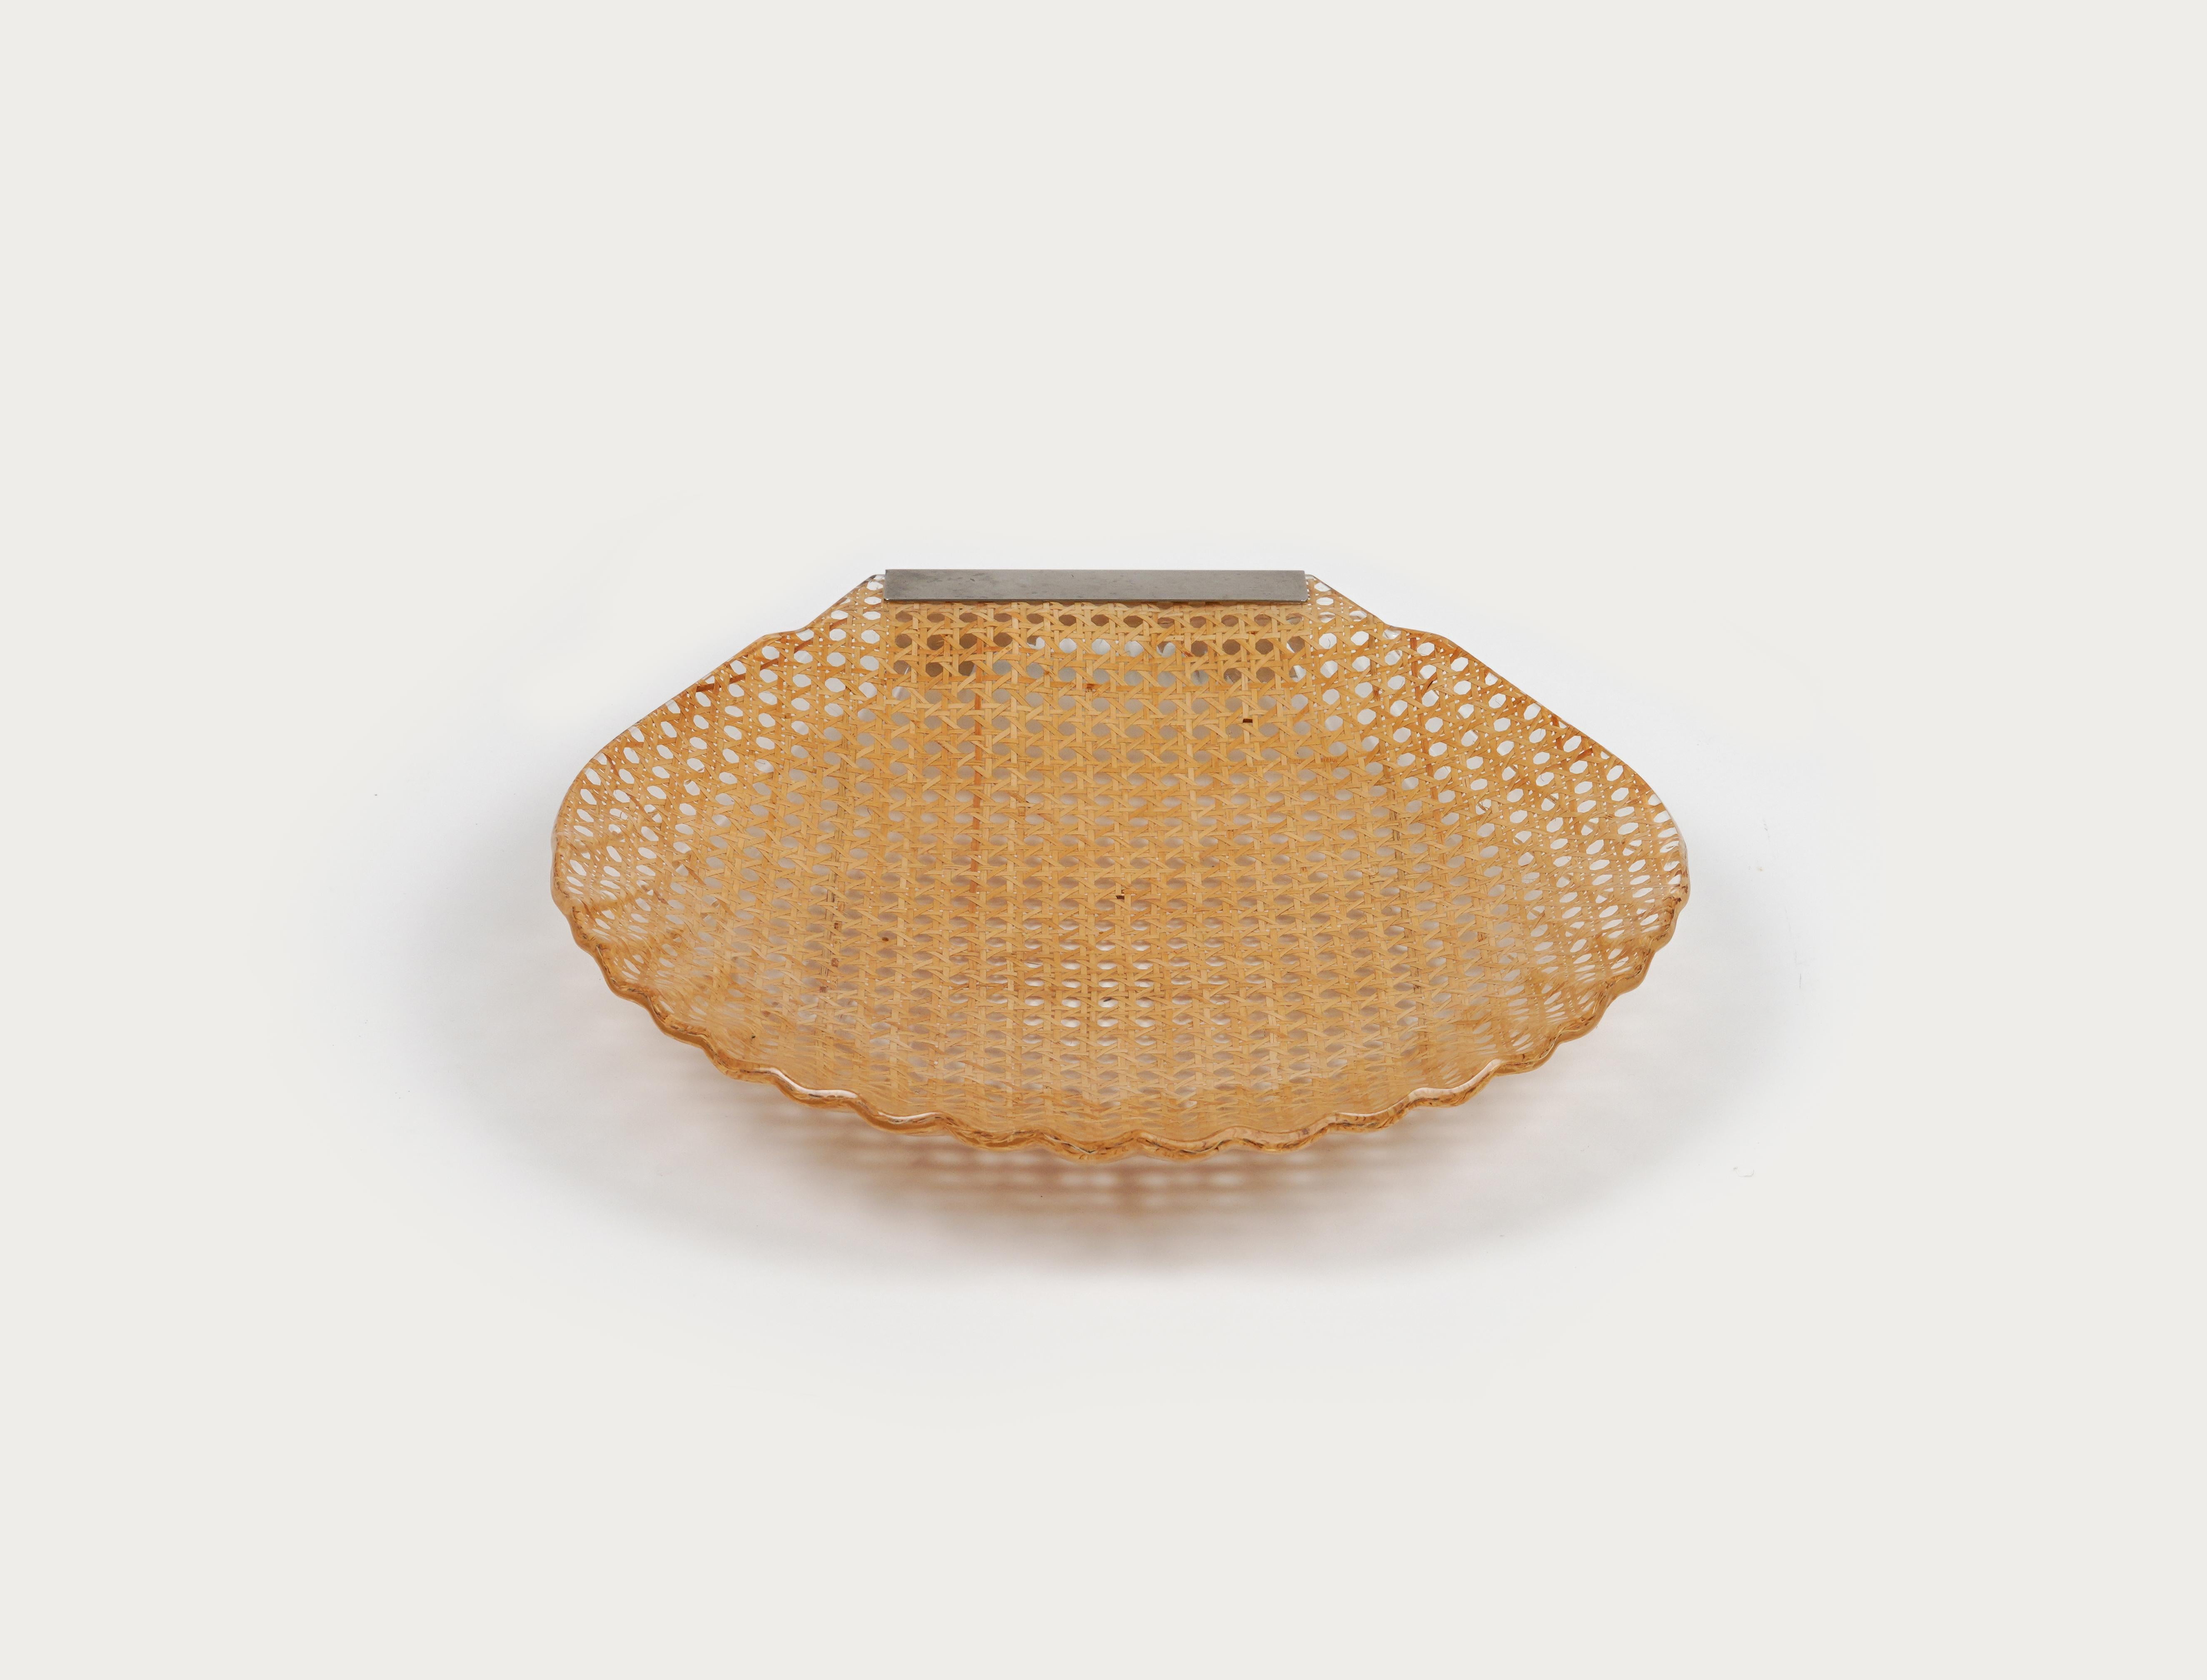 Mid-Century Modern Shell Serving Tray Lucite and Rattan Christian Dior Style, France, 1970s For Sale